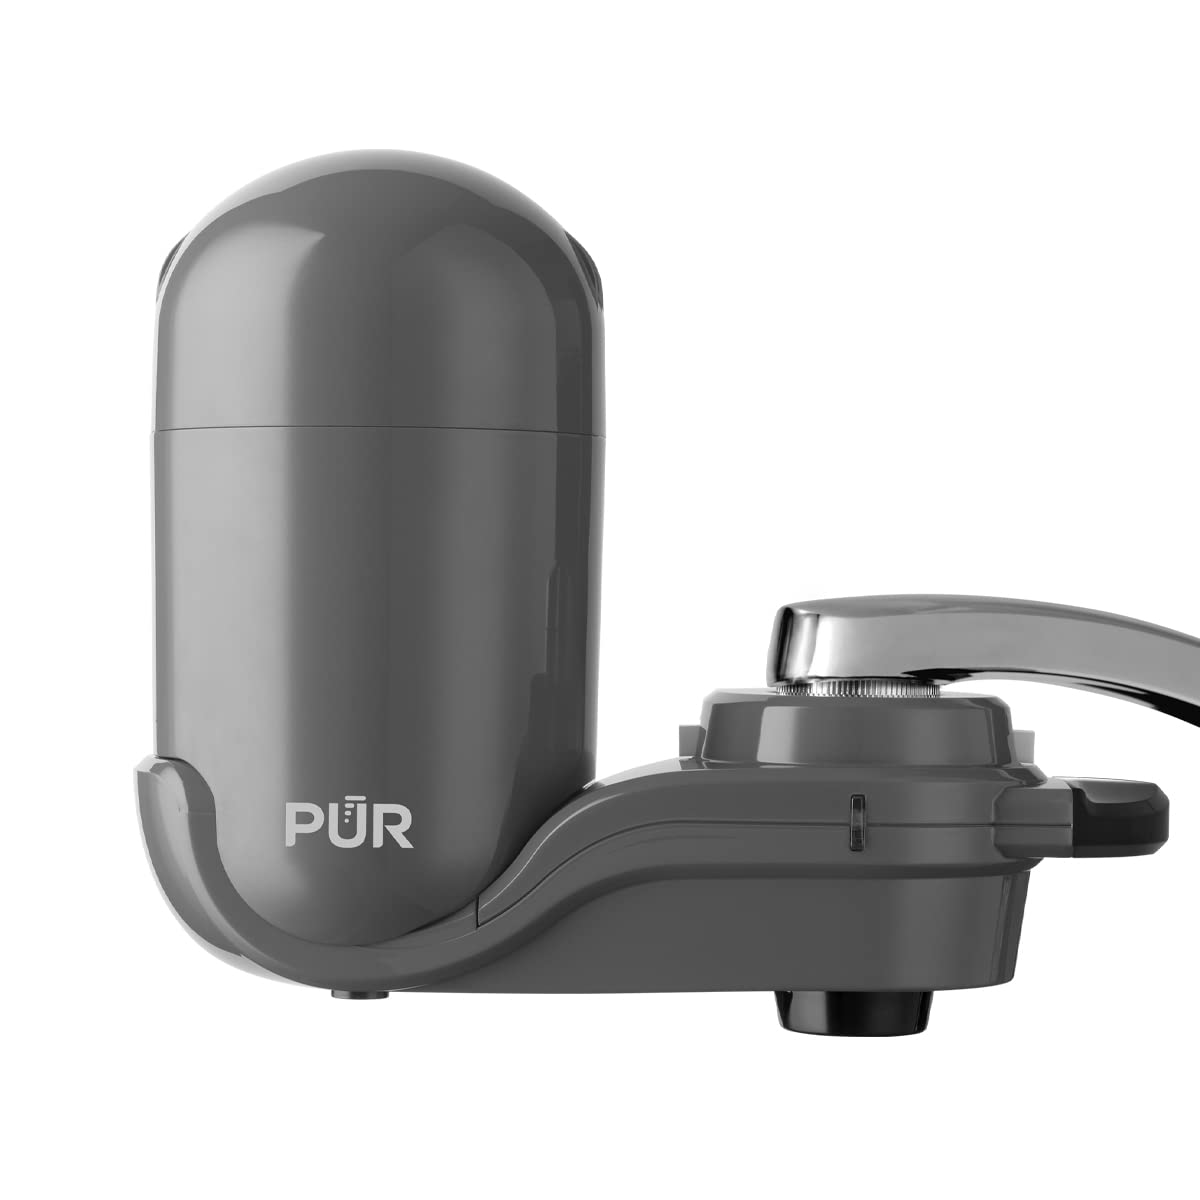 PUR PLUS Faucet Mount Water Filtration System, Gray – [...]